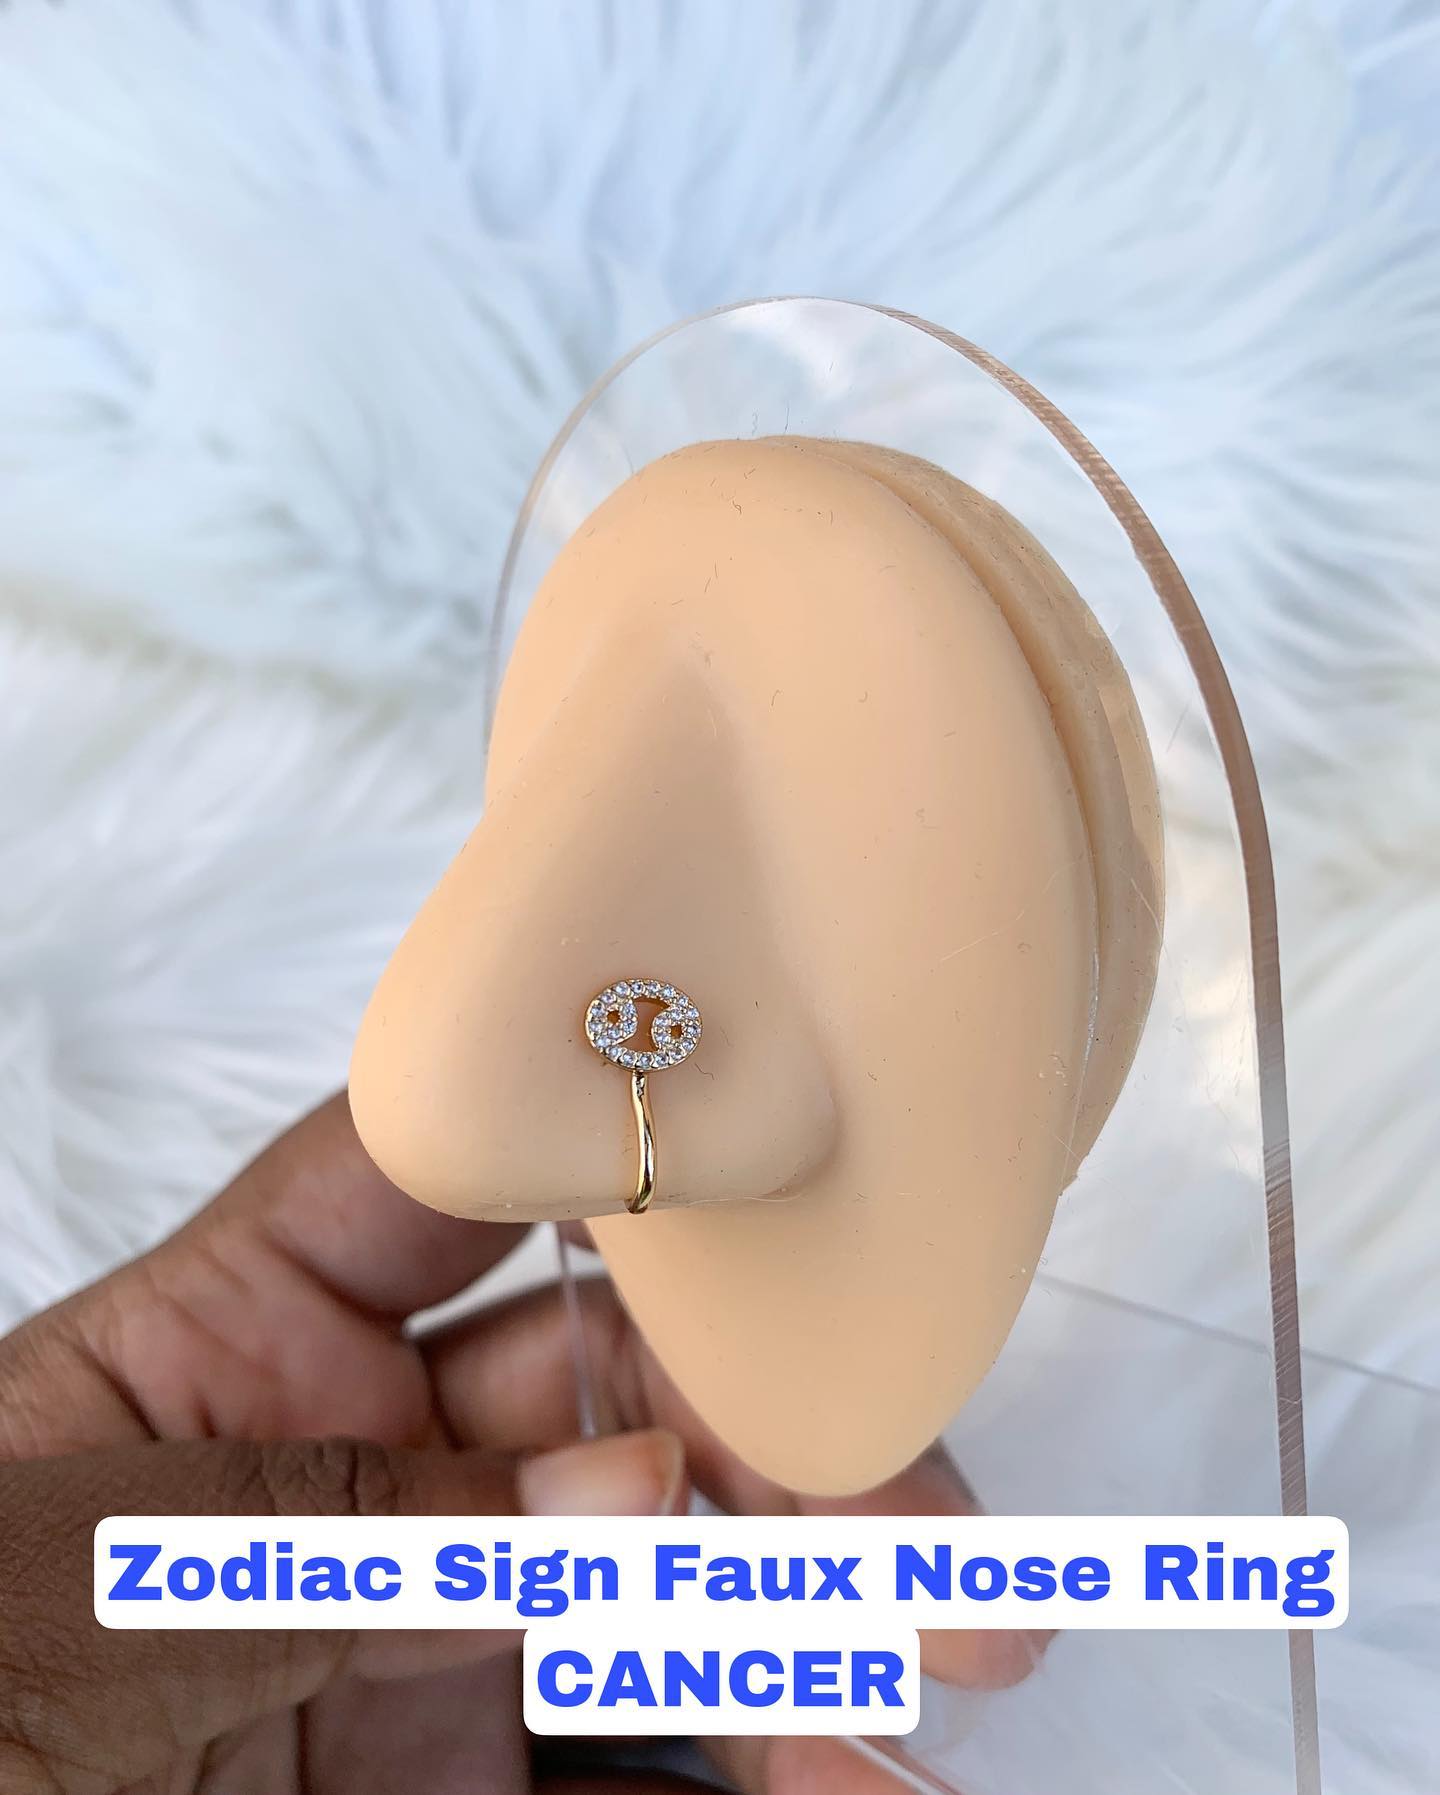 "Cancer" Faux Nose Rings